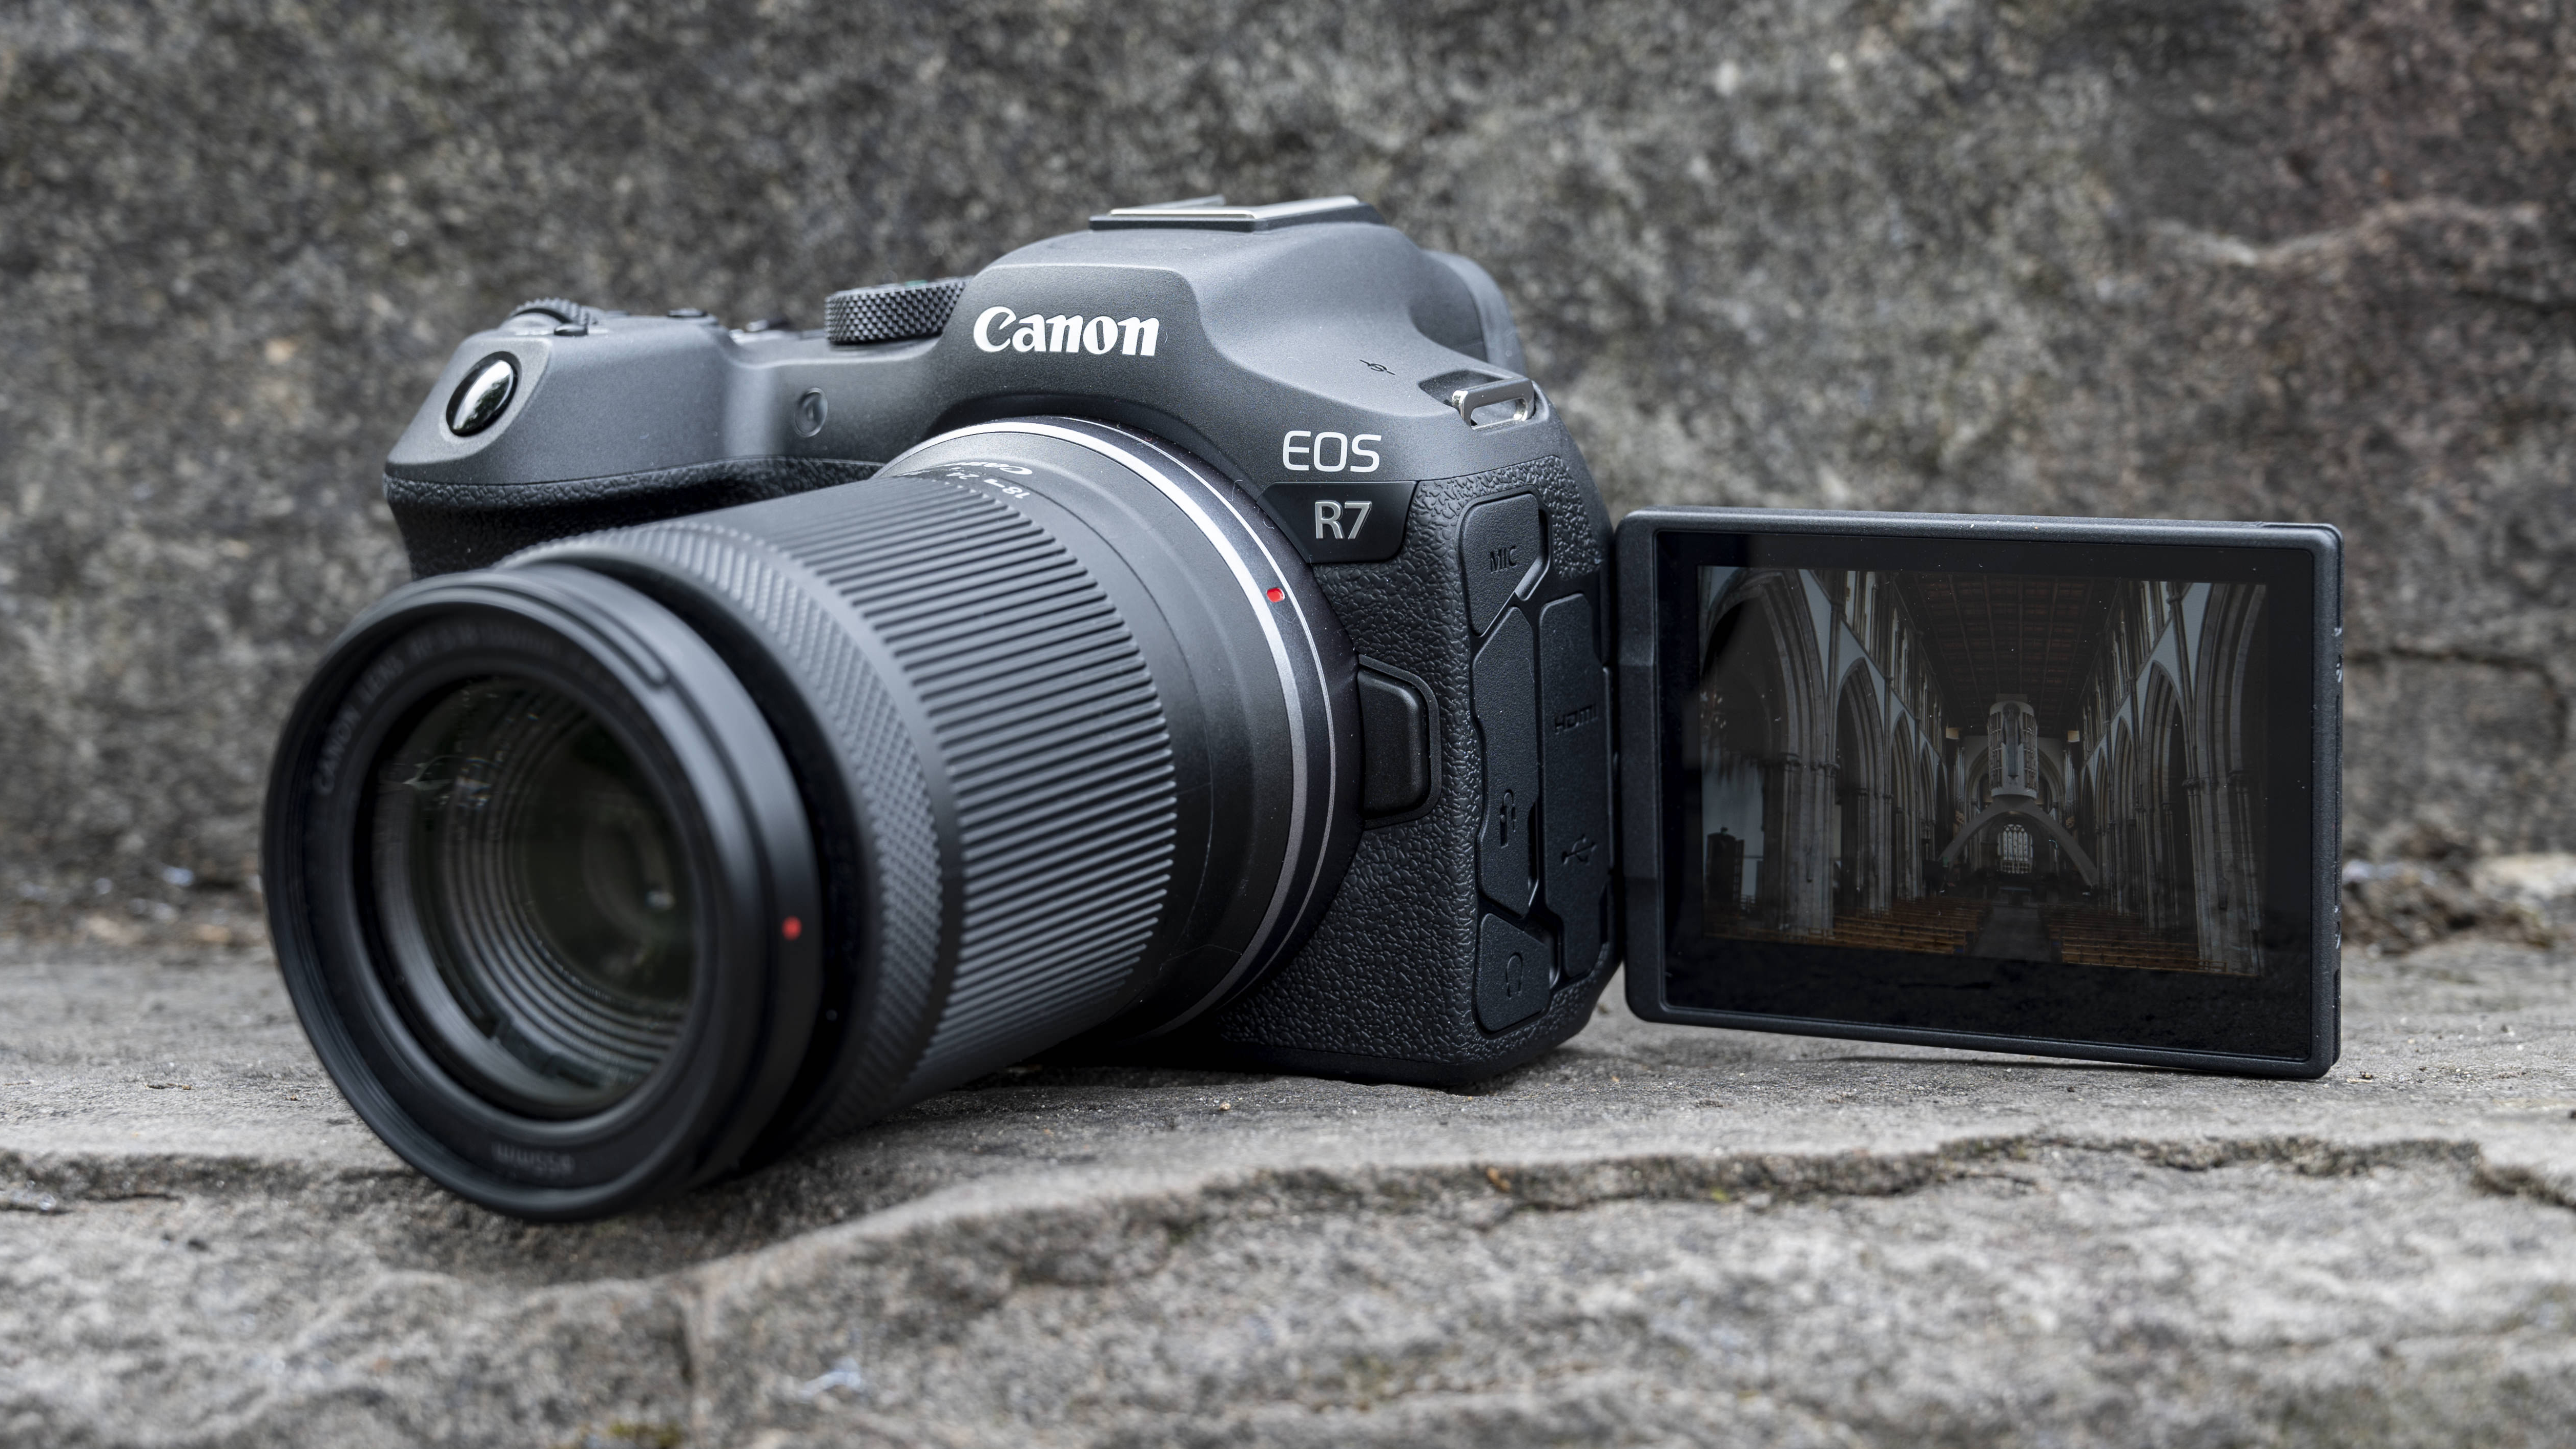 The Canon EOS R7 camera sitting on a stone step